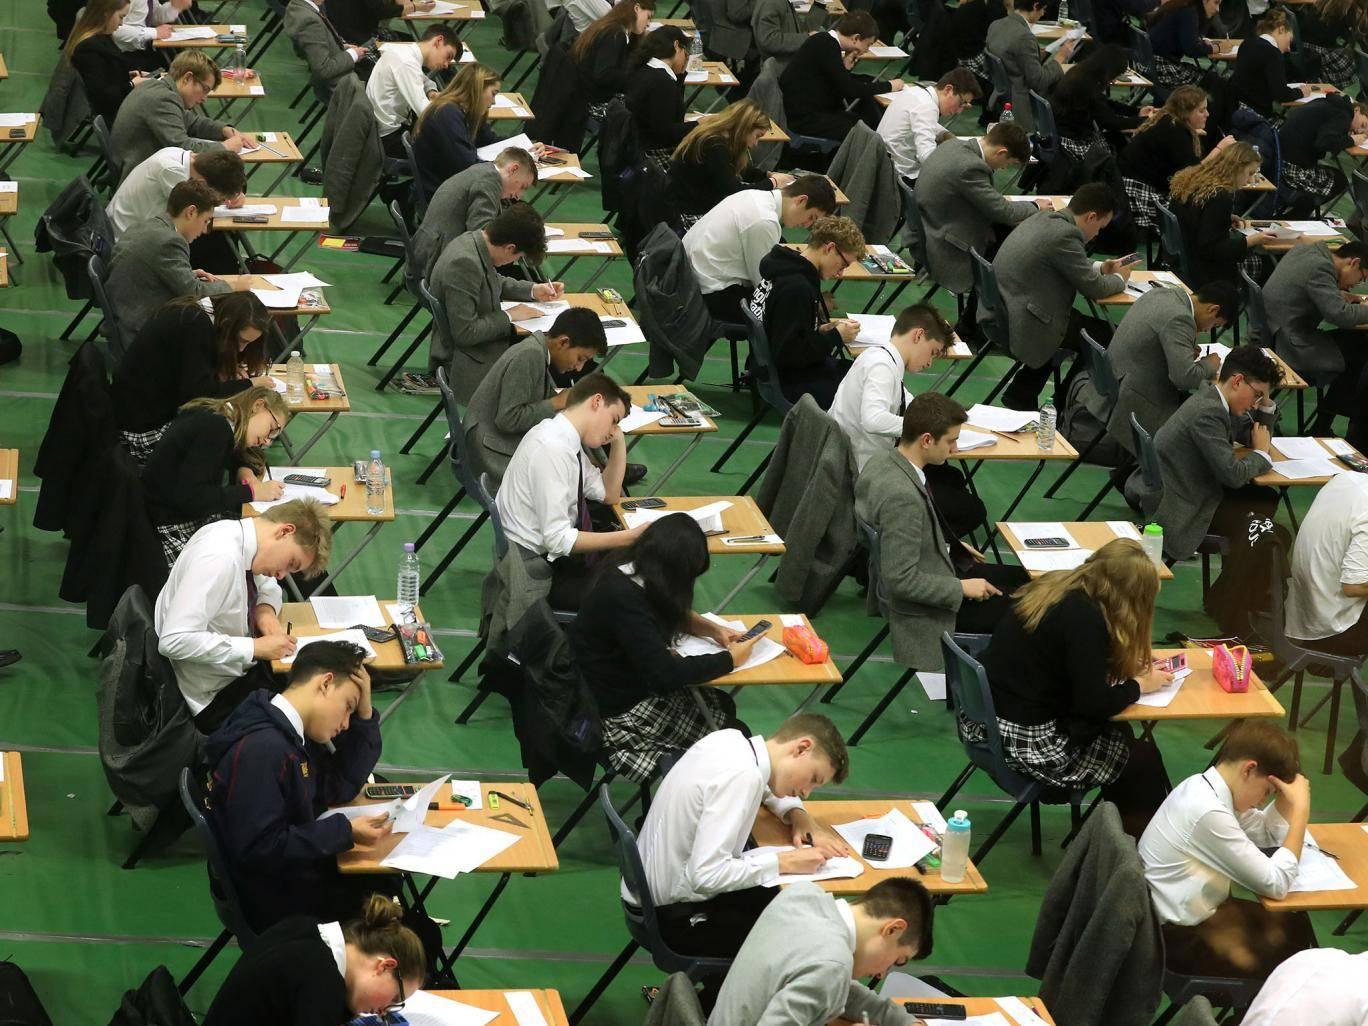 More than 14,000 took the GCSE paper which contained the error last year